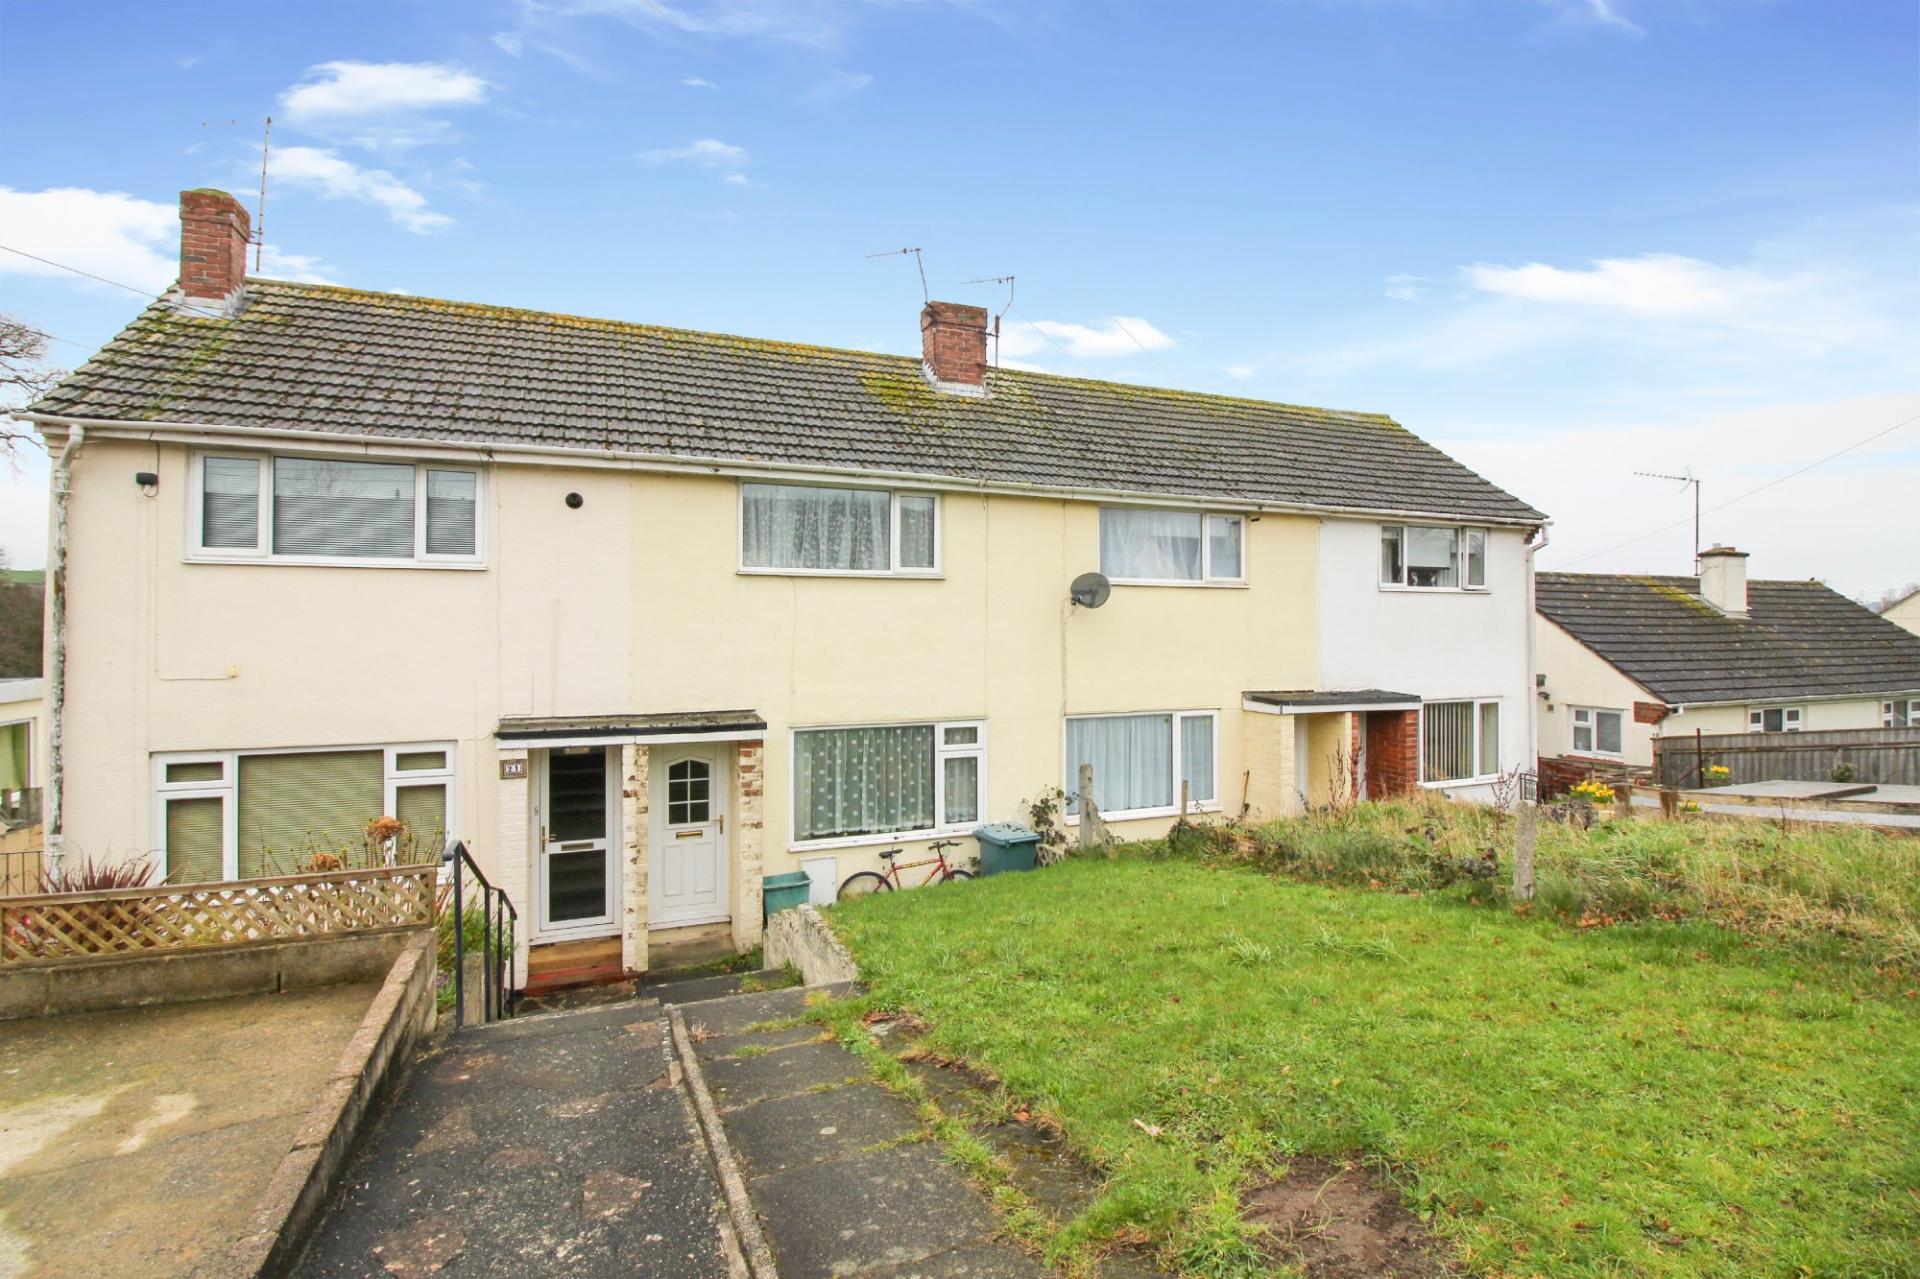 2 bedroom Terraced House for sale in Newton Abbot